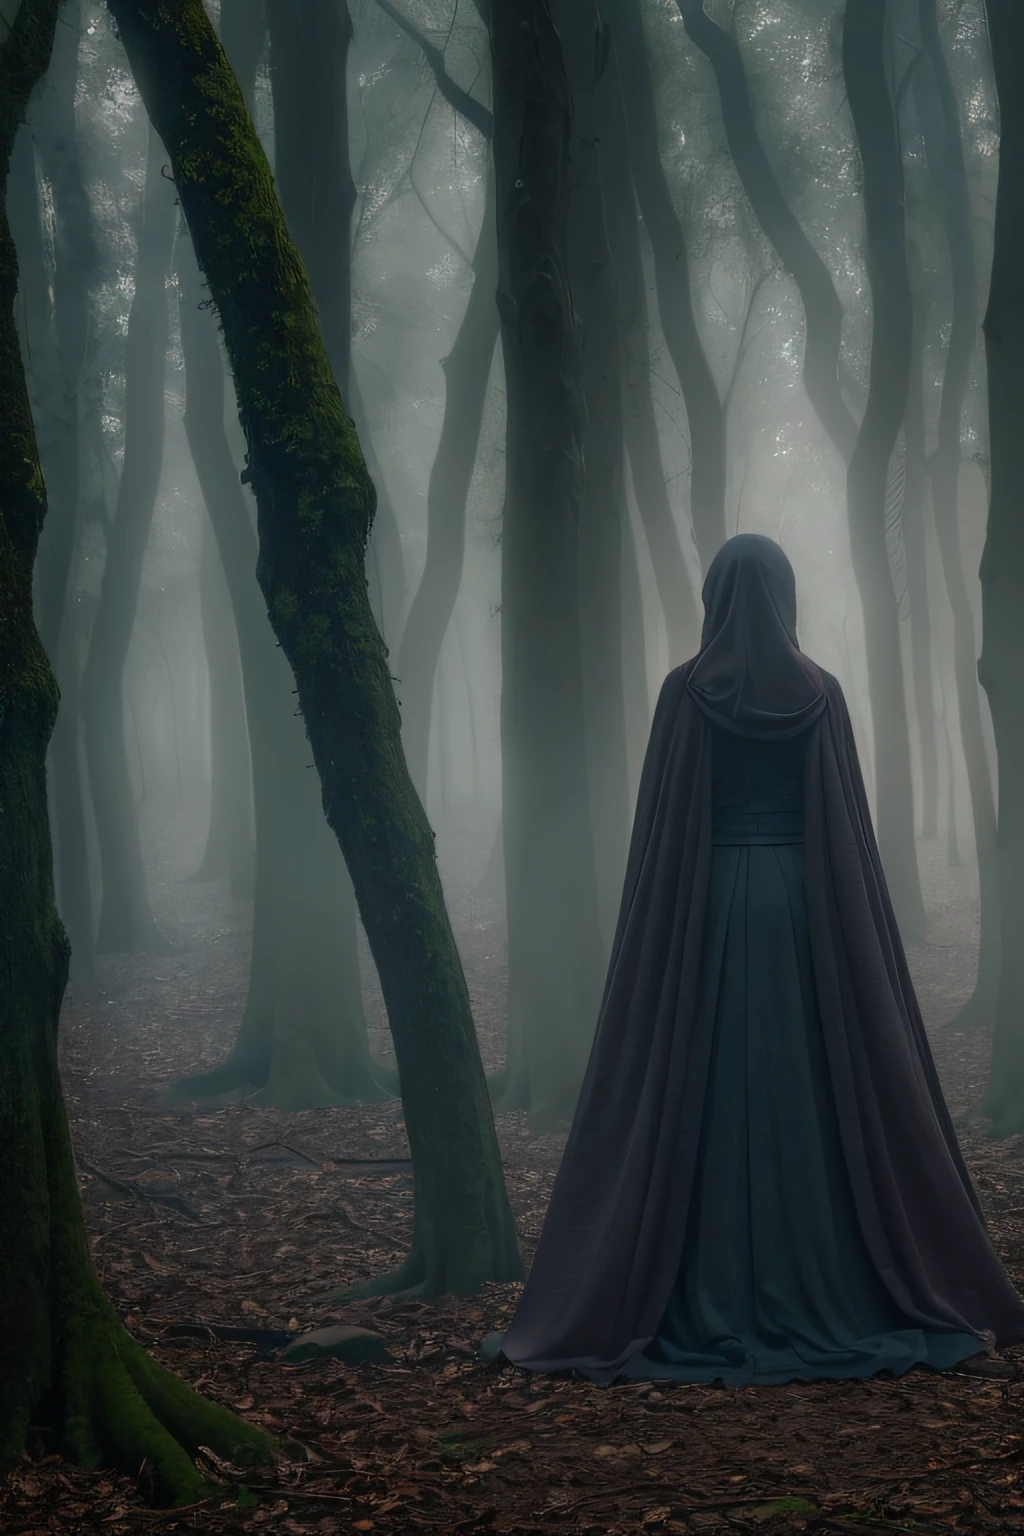 Amidst a dense forest shrouded in mist, a person with anxiety wanders through the labyrinth of trees. The air is thick with an eerie silence, and the person's apprehension is palpable as they look over their shoulder, feeling an inexplicable fear of the unknown. The ethereal quality of the woods adds to the sense of foreboding, making it seem like a place from a haunting fairytale. The photograph captures the feeling of being lost in one's thoughts and emotions, surrounded by a haunting beauty that mirrors their inner struggles. Photo taken by Elena Petrova with a Nikon D850 and a 50mm lens, utilizing natural light and subtle artificial lighting to create a mystical and emotive scene. --v 5 --q 2